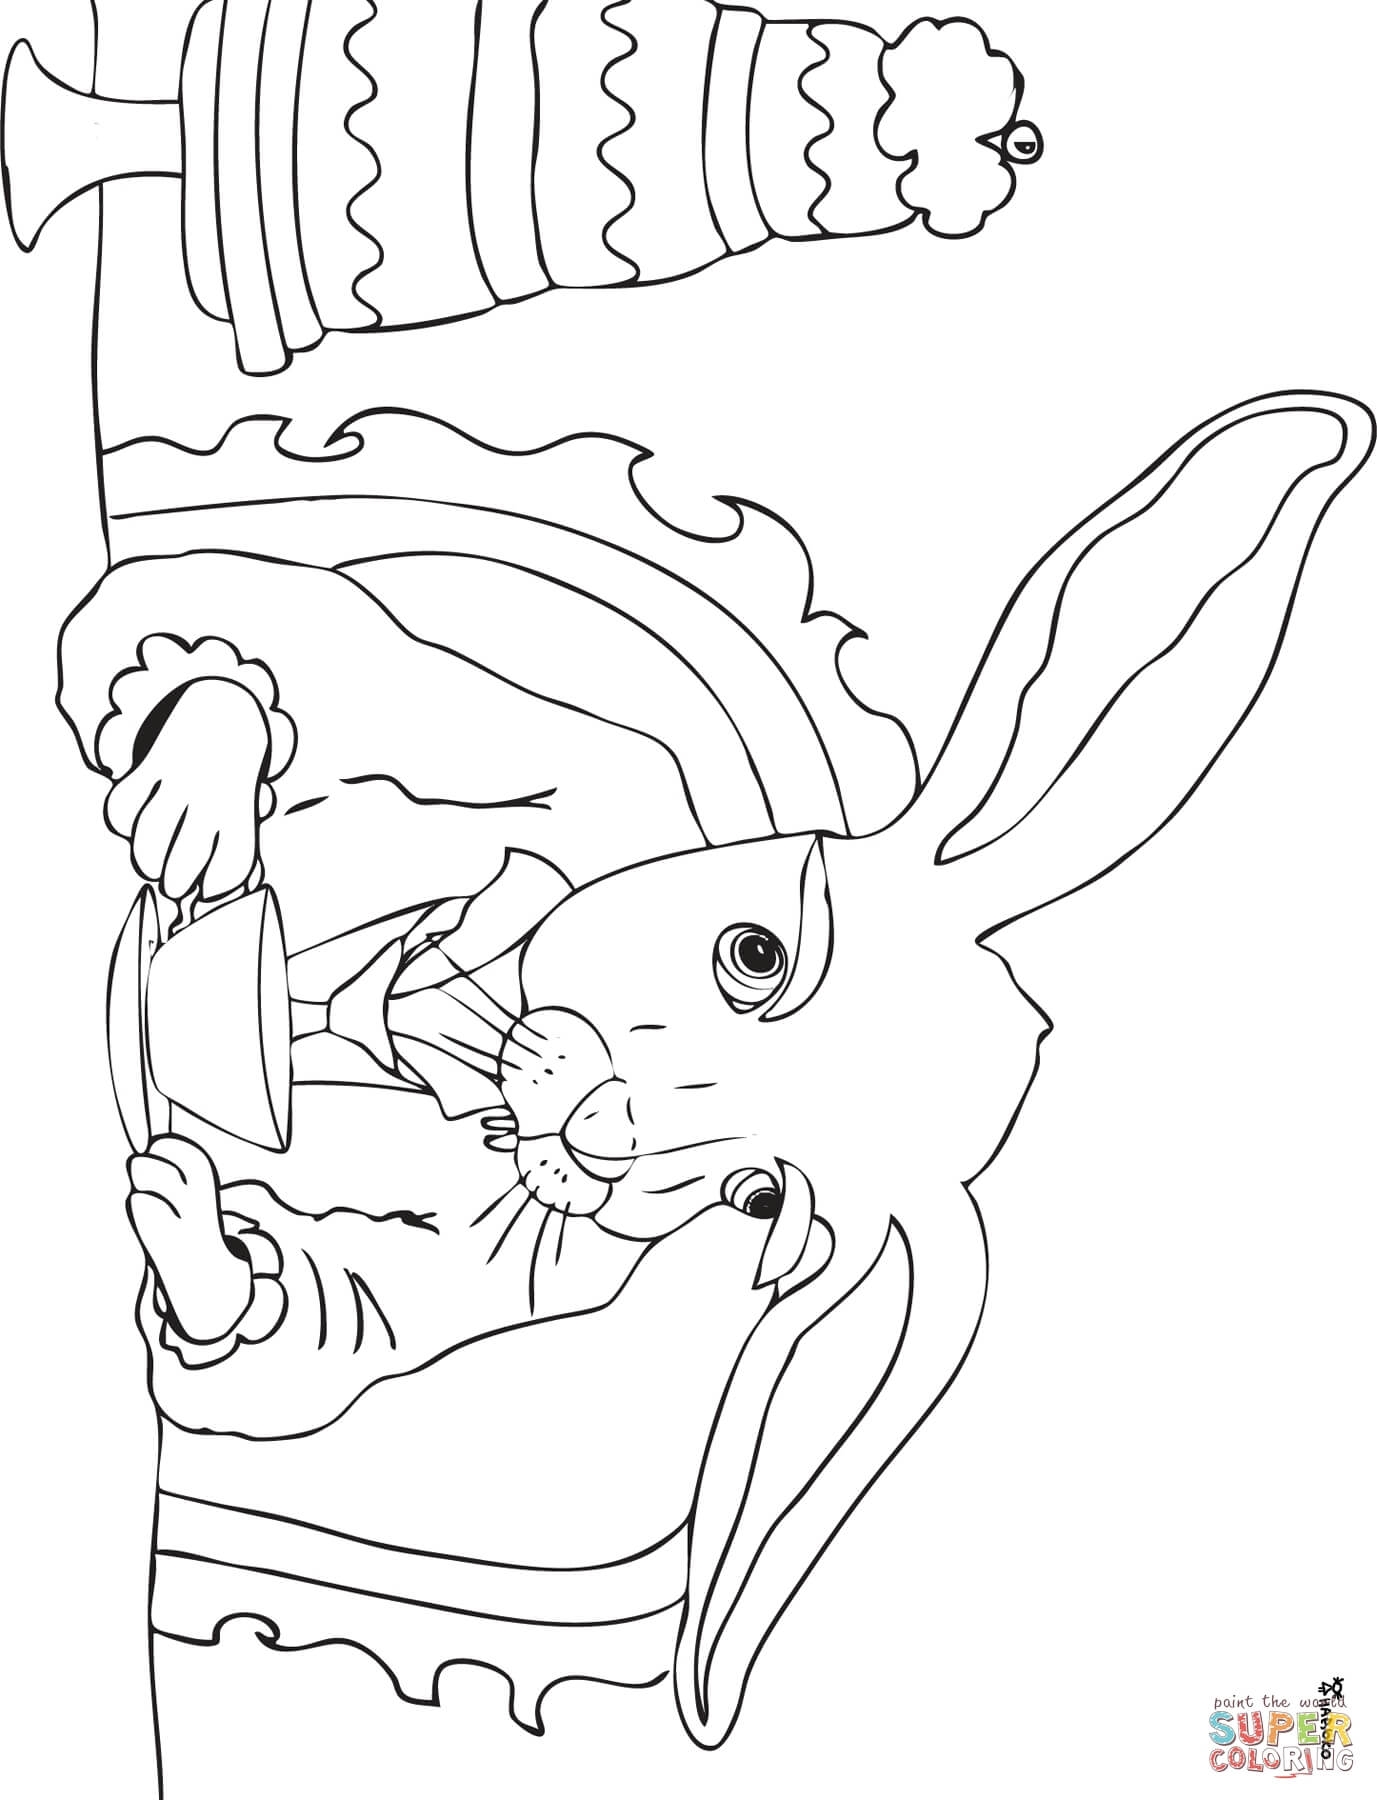 Alice Coloring Page at GetColorings.com | Free printable colorings ...